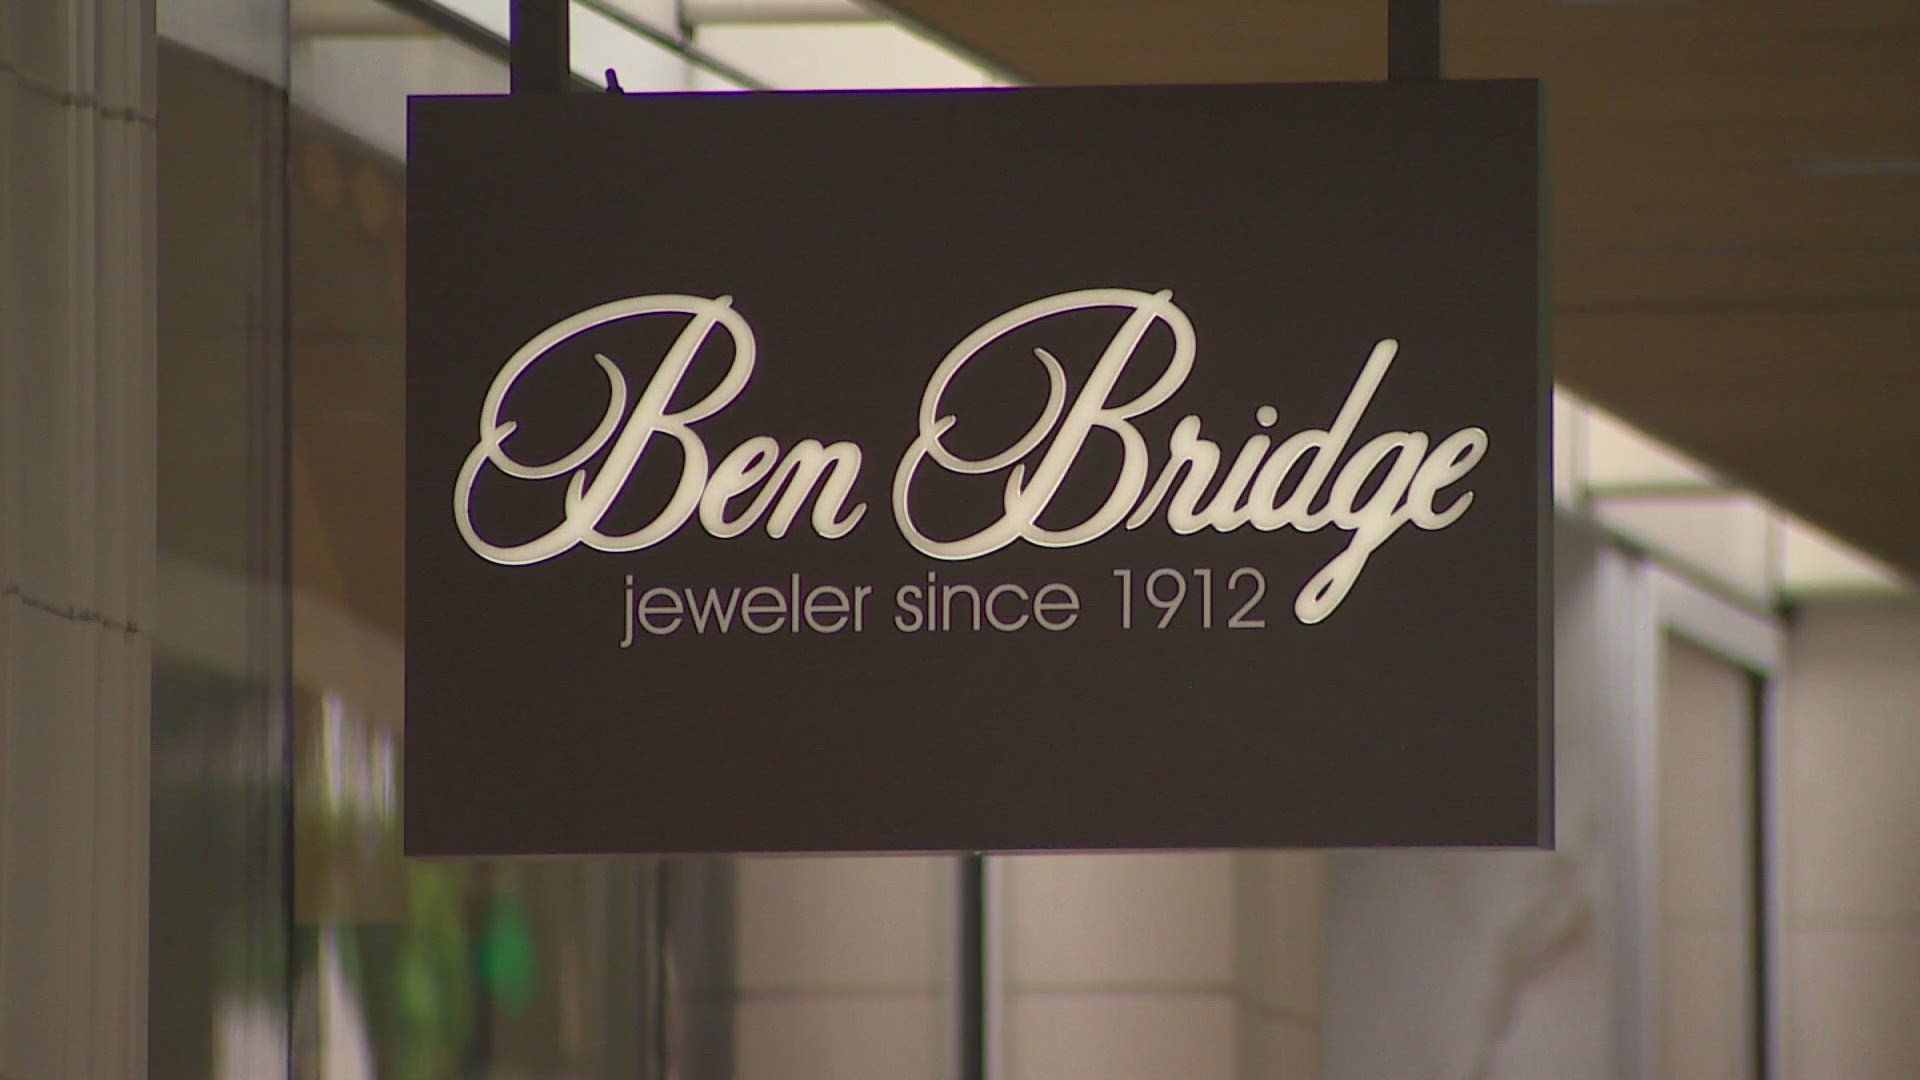 After many Seattle businesses closed downtown, the new Ben Bridge Jeweler flagship store at 5th and Pine hopes to revitalize the area.